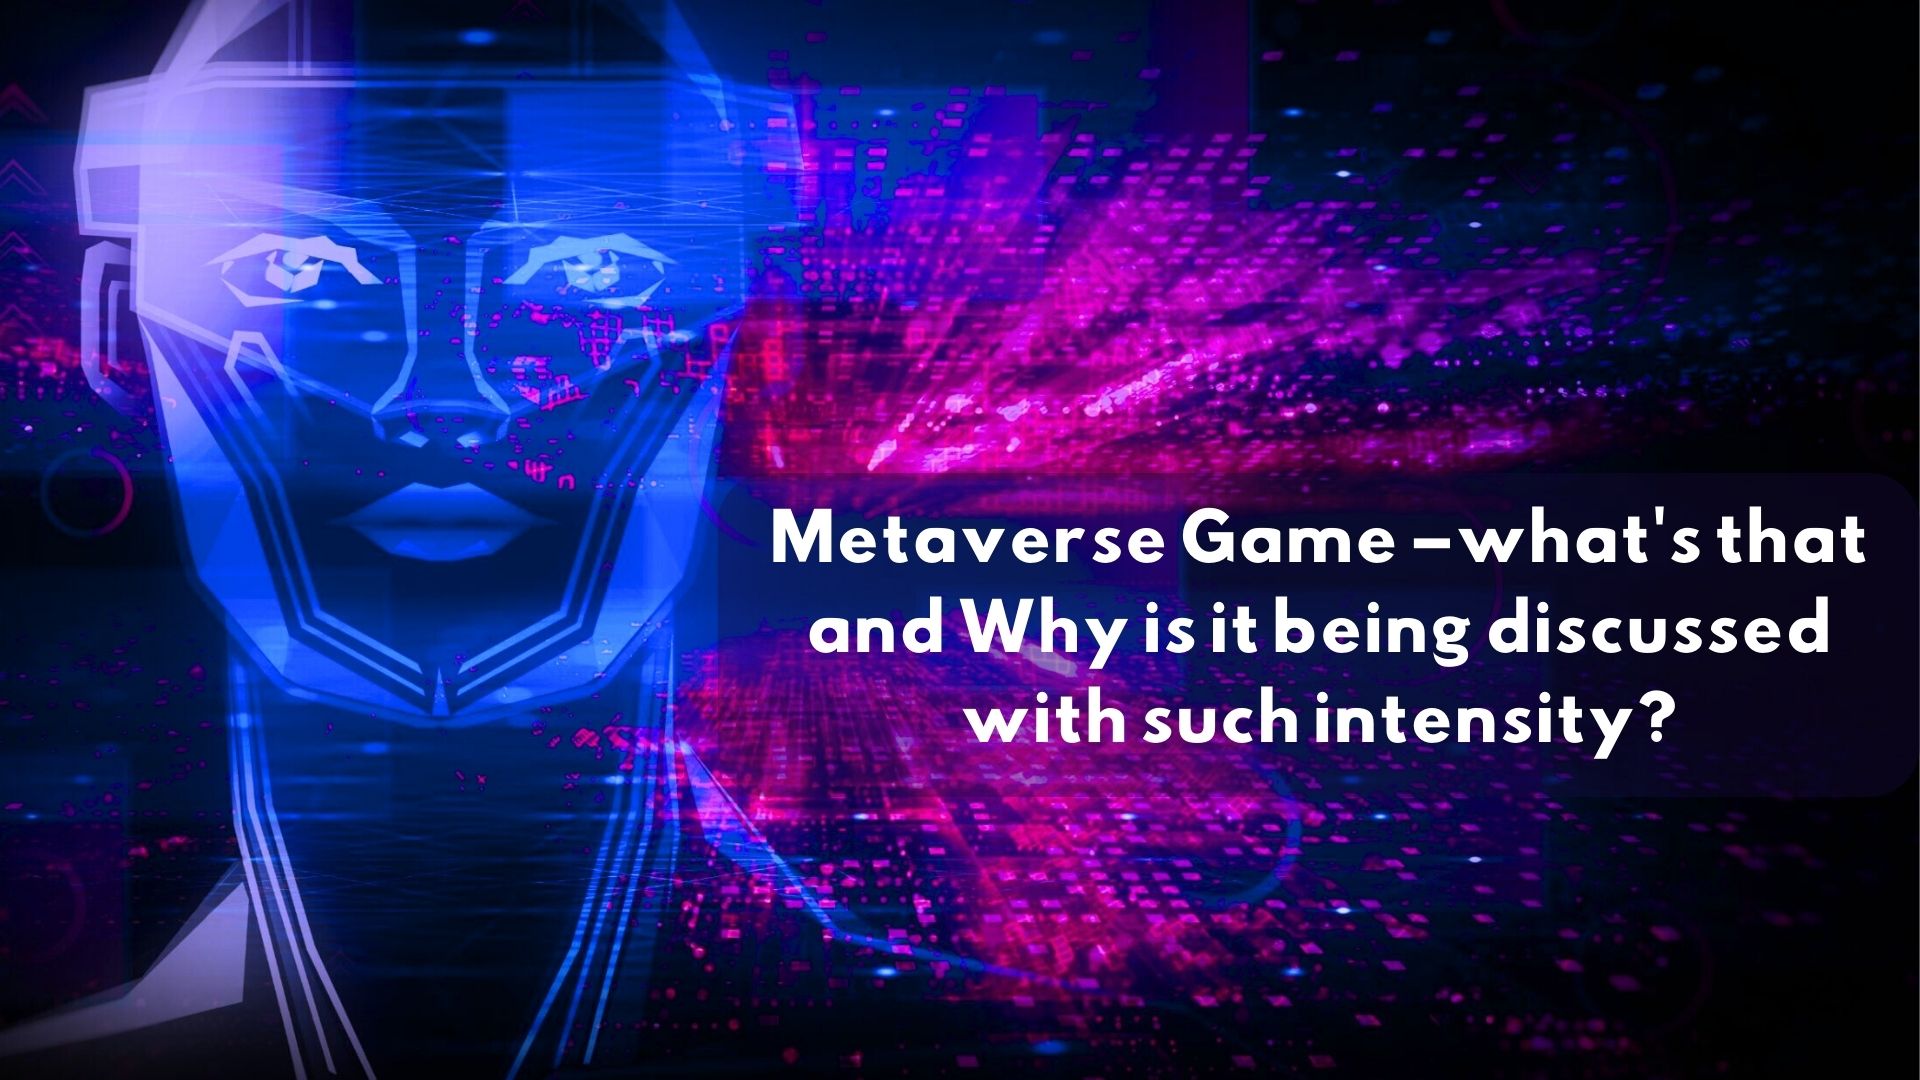 Metaverse Game –what's that and Why is it being discussed with such intensity?